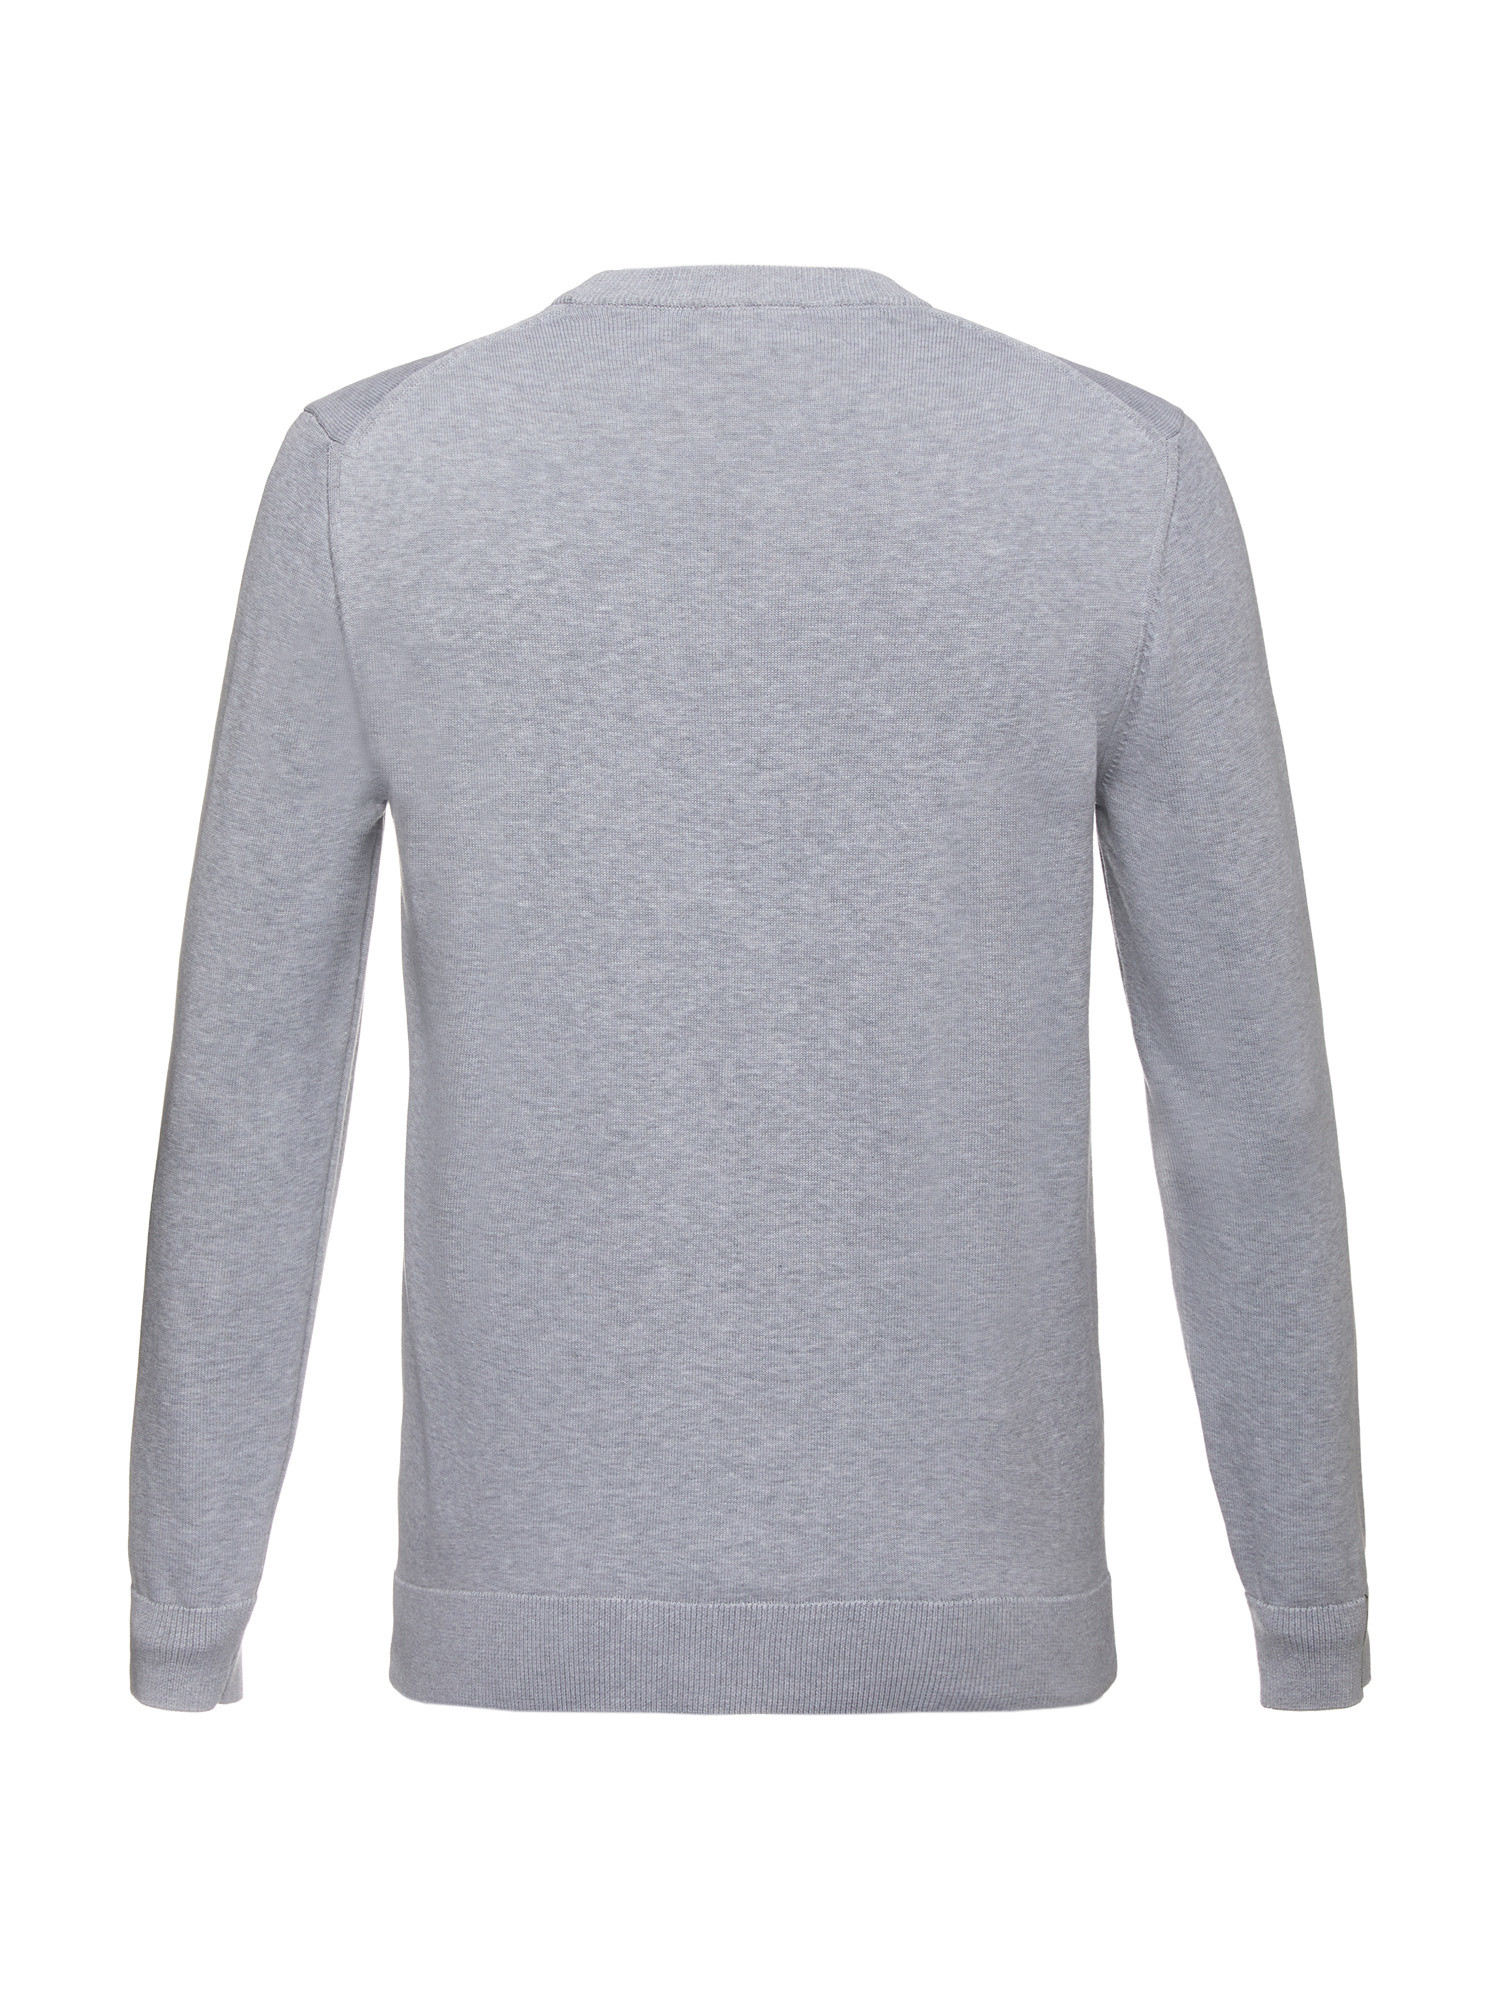 Lacoste - Organic cotton pullover, Light Grey, large image number 1